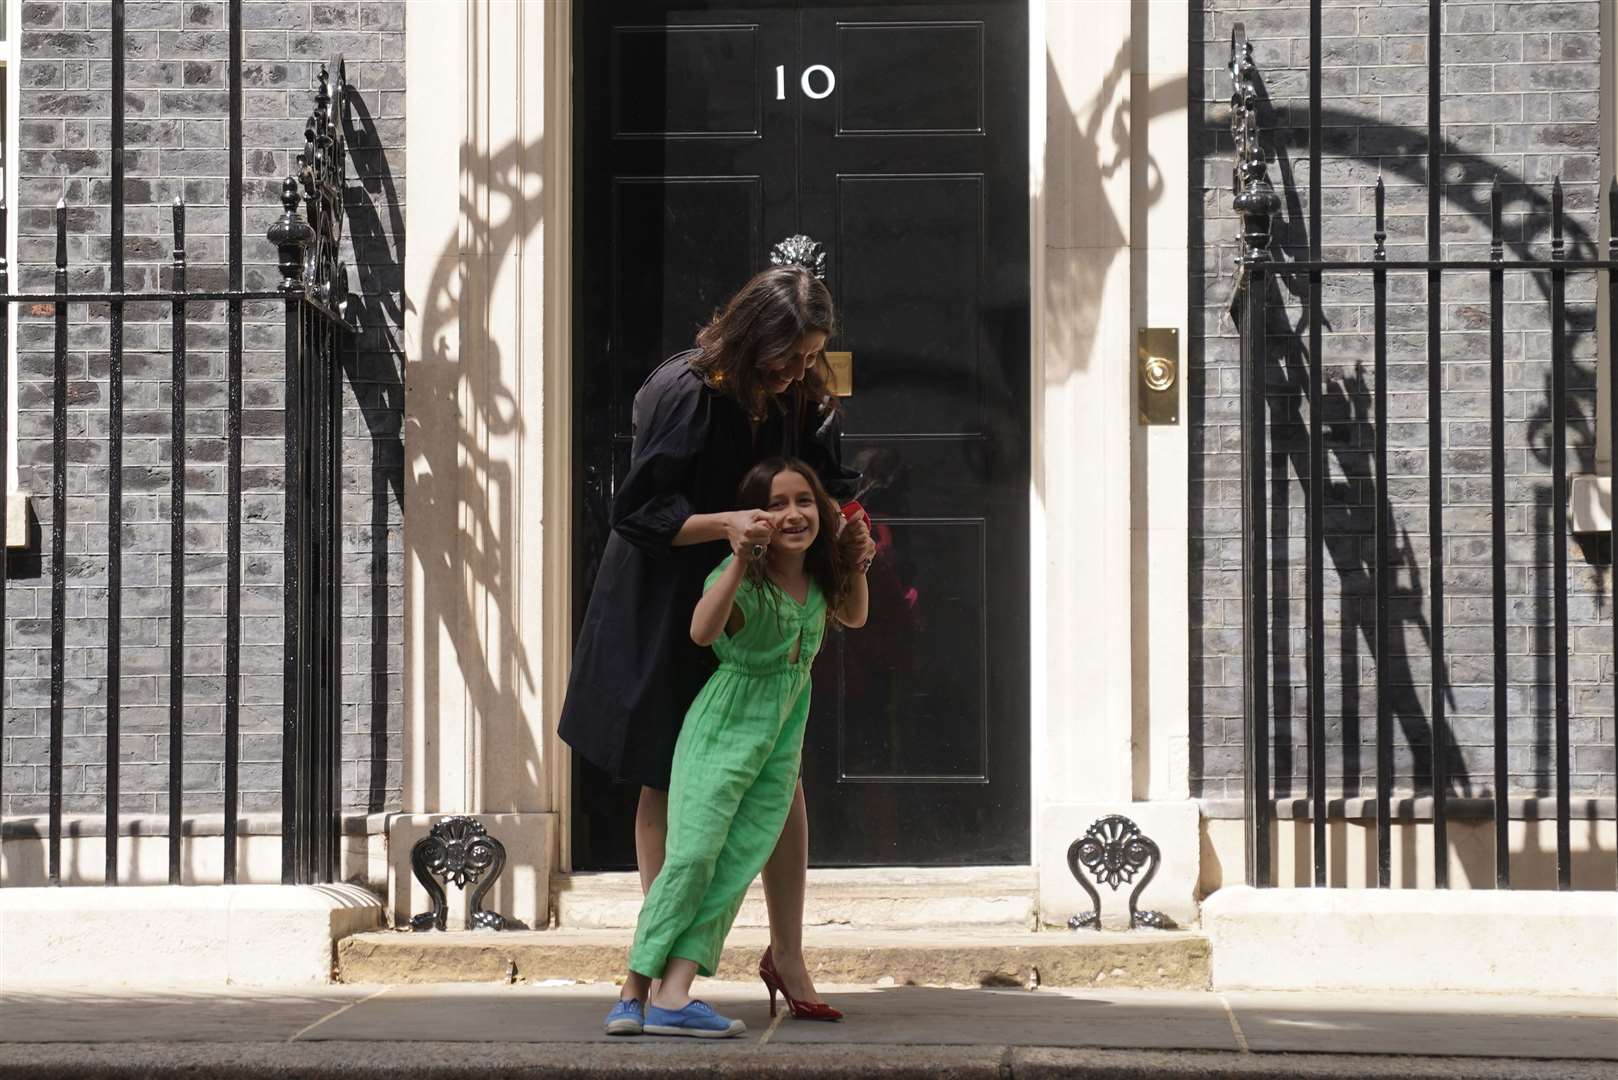 Ms Zaghari-Ratcliffe with her daughter Gabriella leaving 10 Downing Street (Victoria Jones/PA)